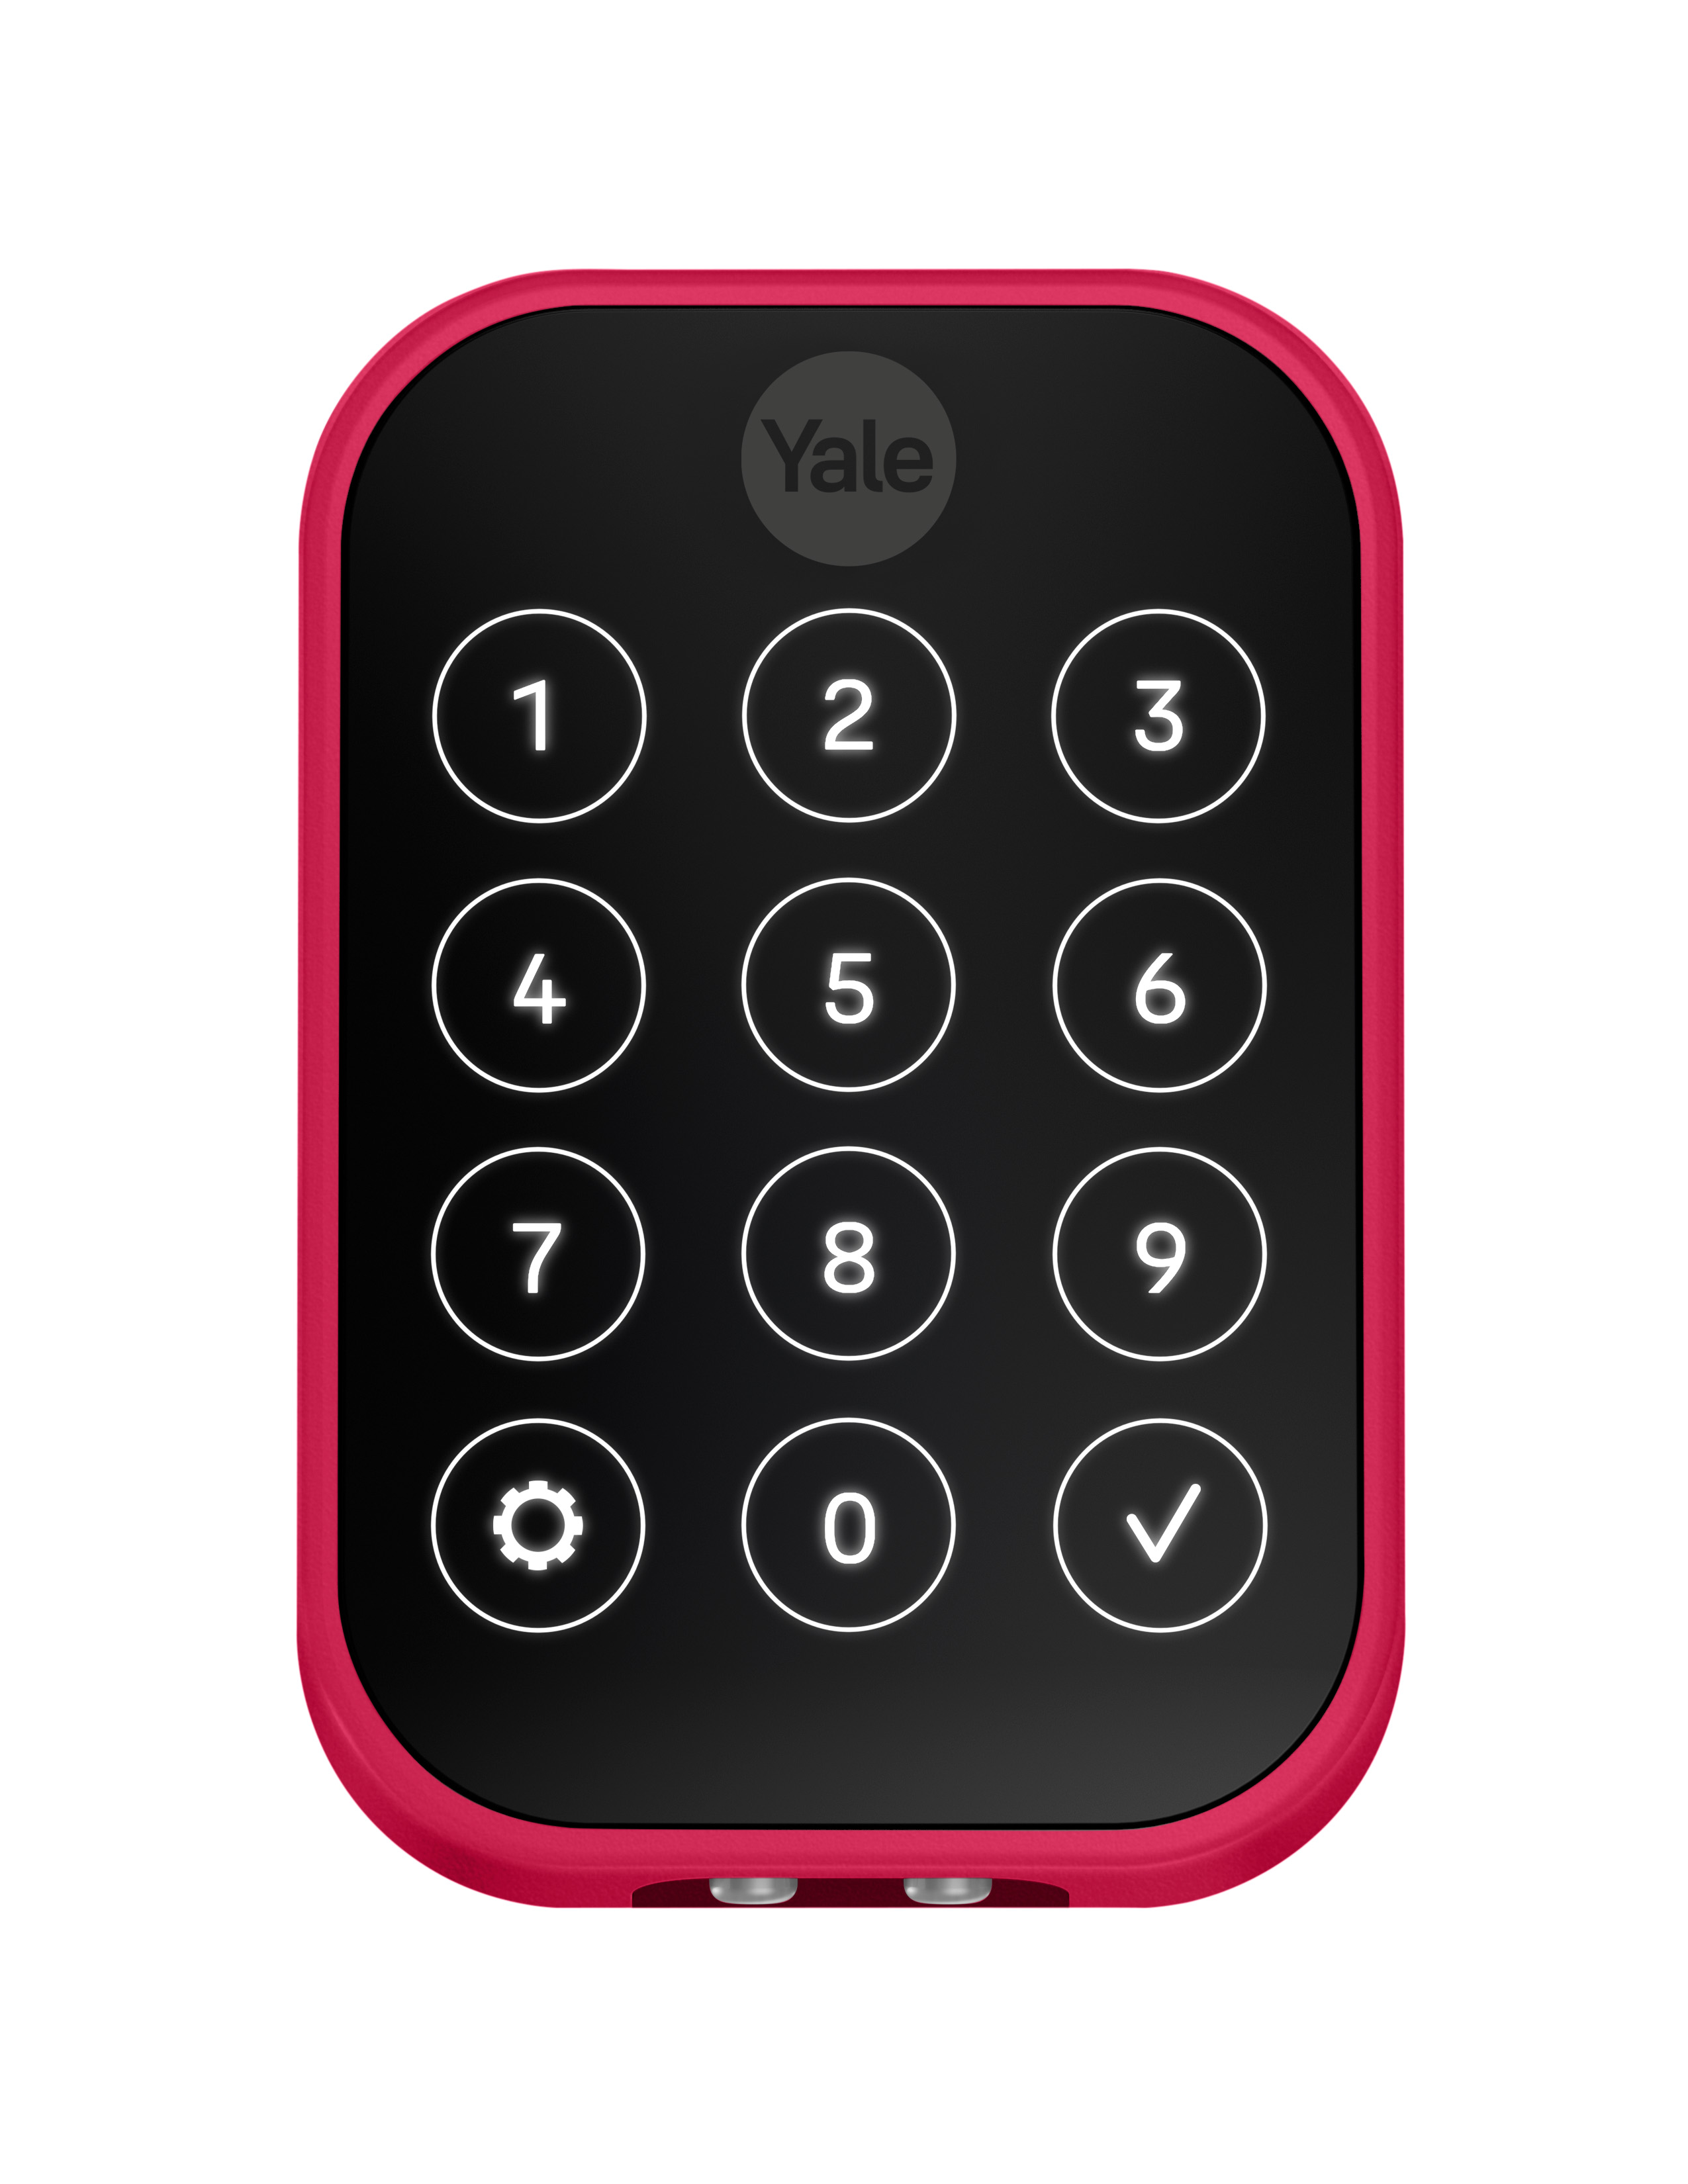 Yale x Pantone Yale Assure Lock 2 Limited Edition Key-Free Touchscreen with Wi-Fi in Viva Magenta